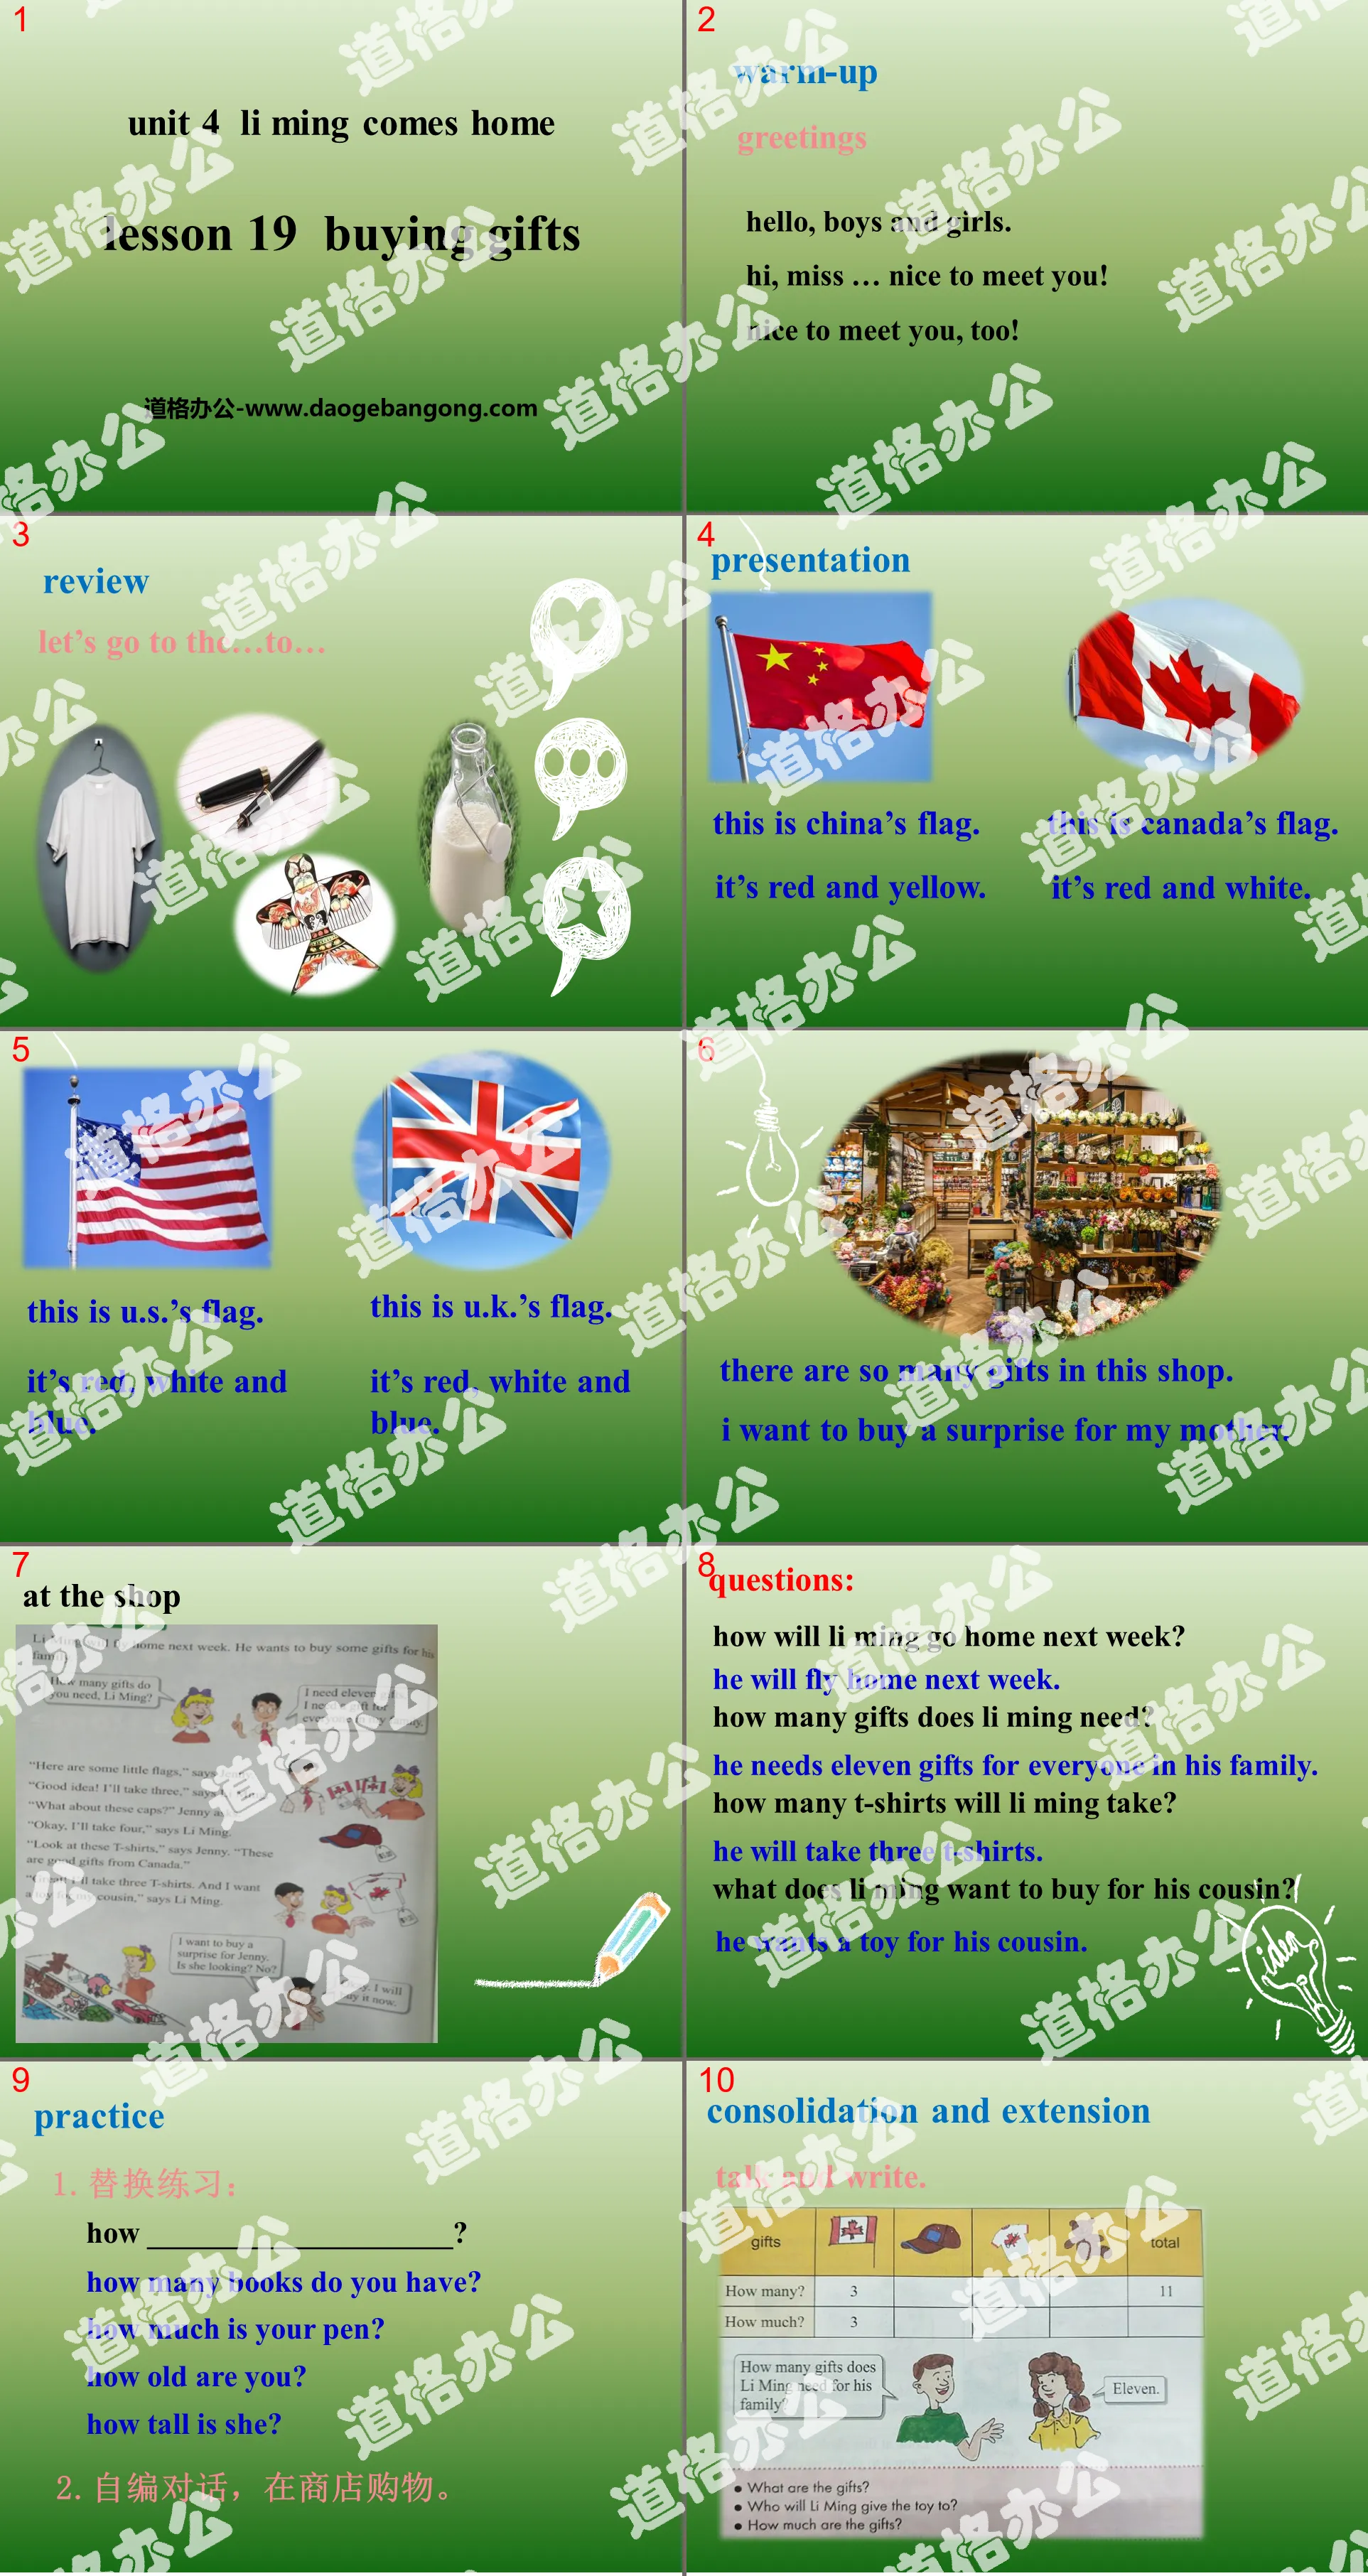 《Buying Gifts》Li Ming Comes Home PPT